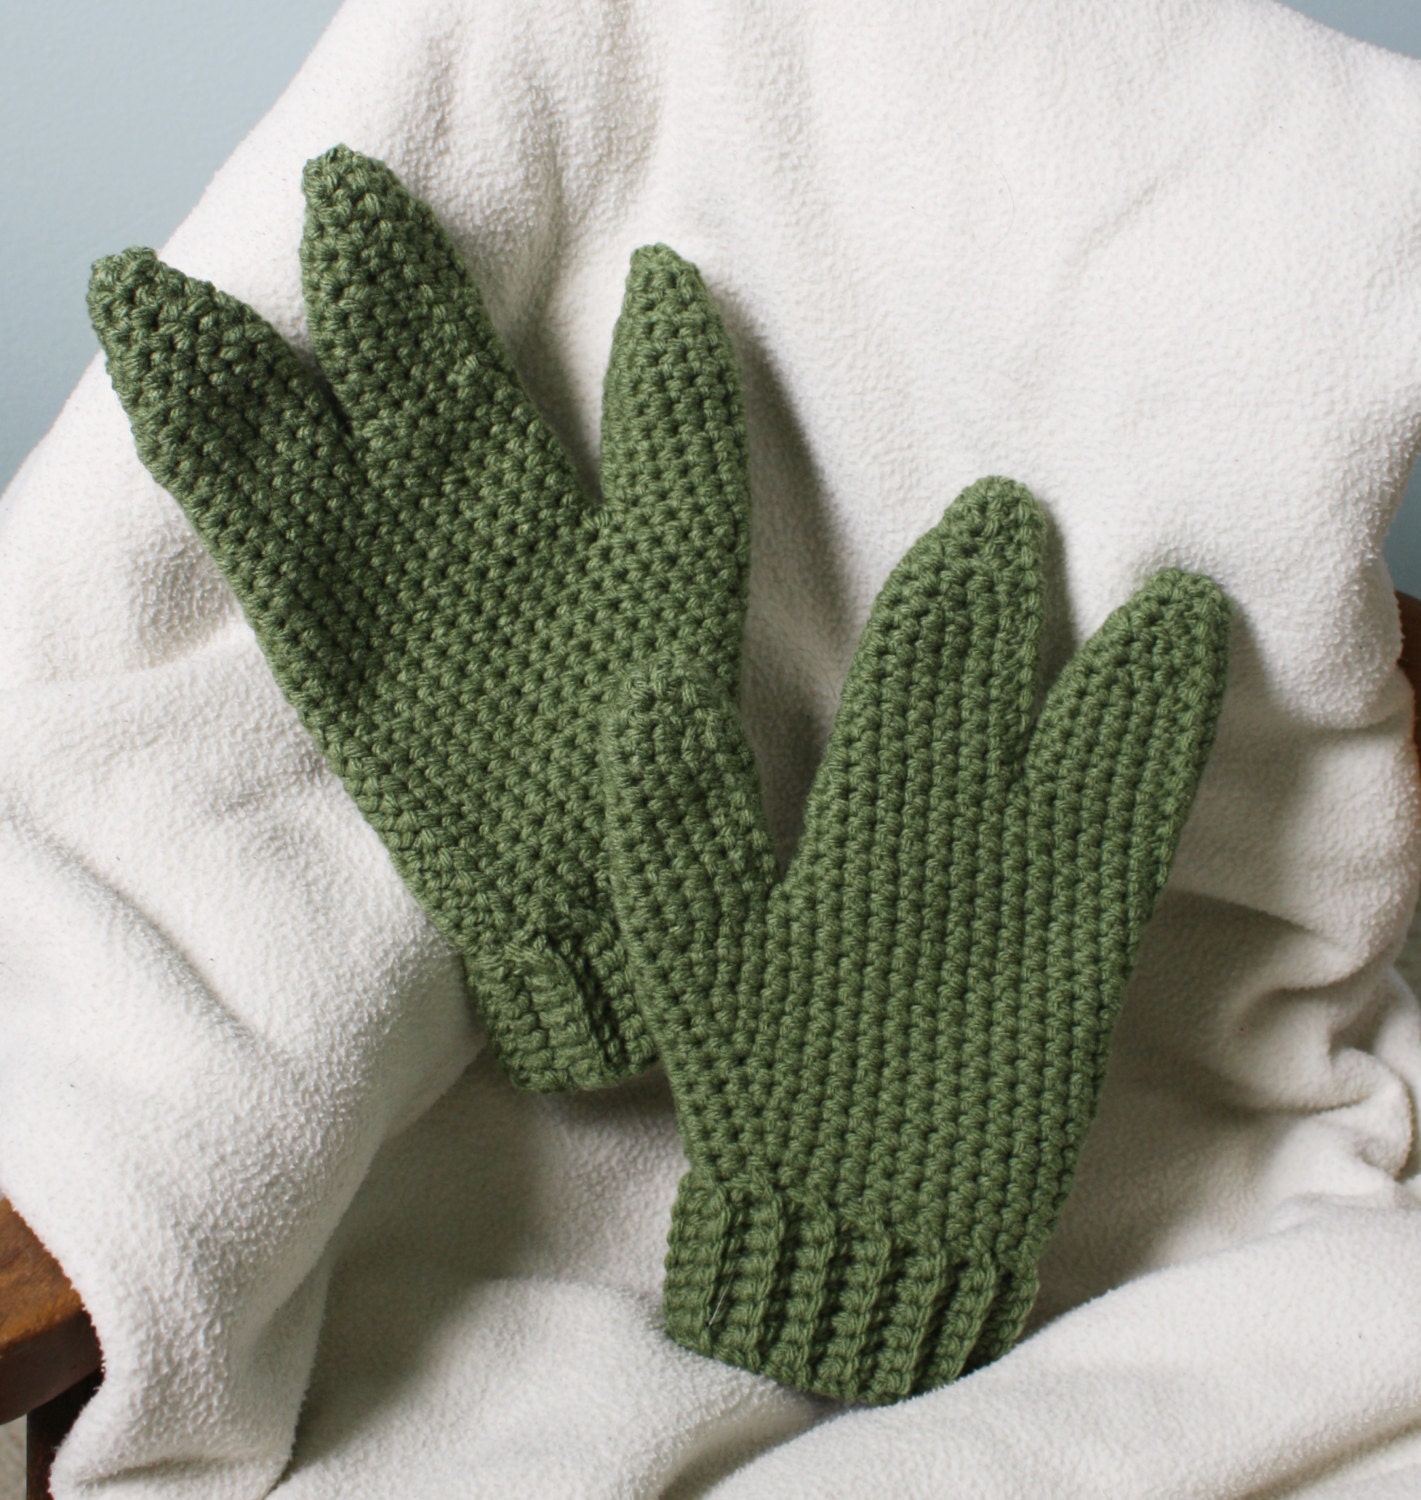 Get Catty with Crochet: Make Your Own Clawed Half-Finger Gloves